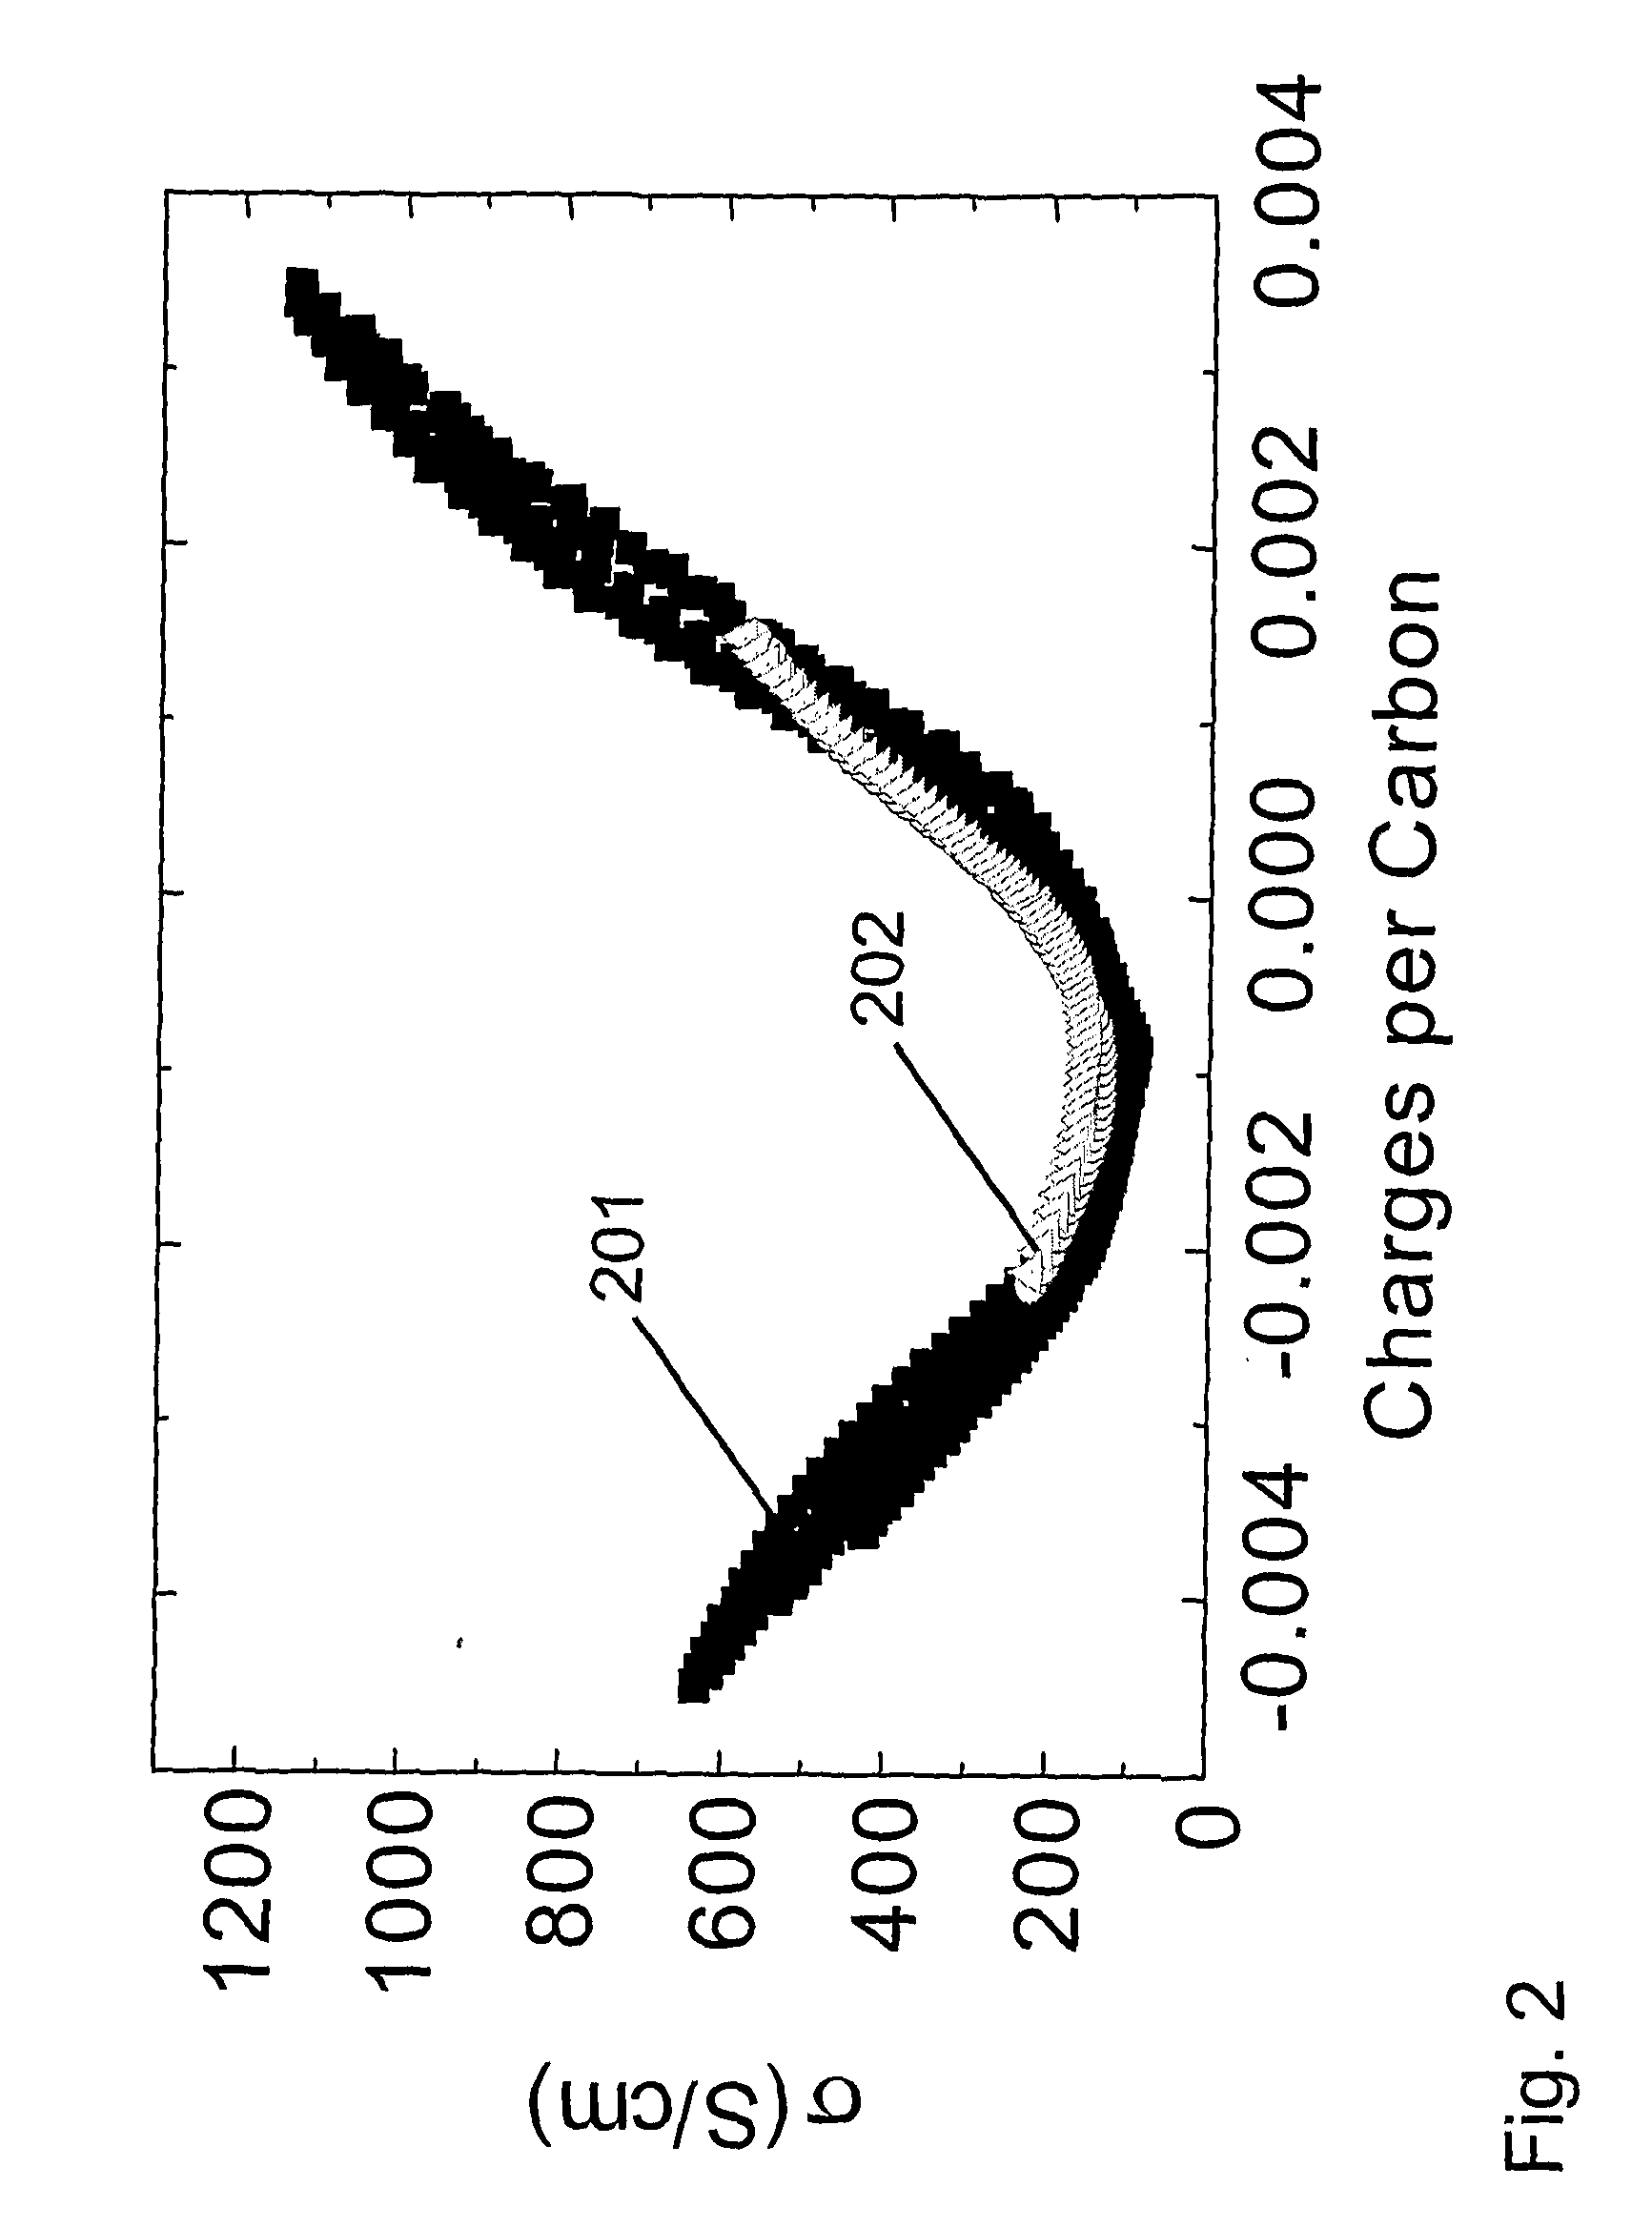 Material and device properties modification by electrochemical charge injection in the absence of contacting electrolyte for either local spatial or final states